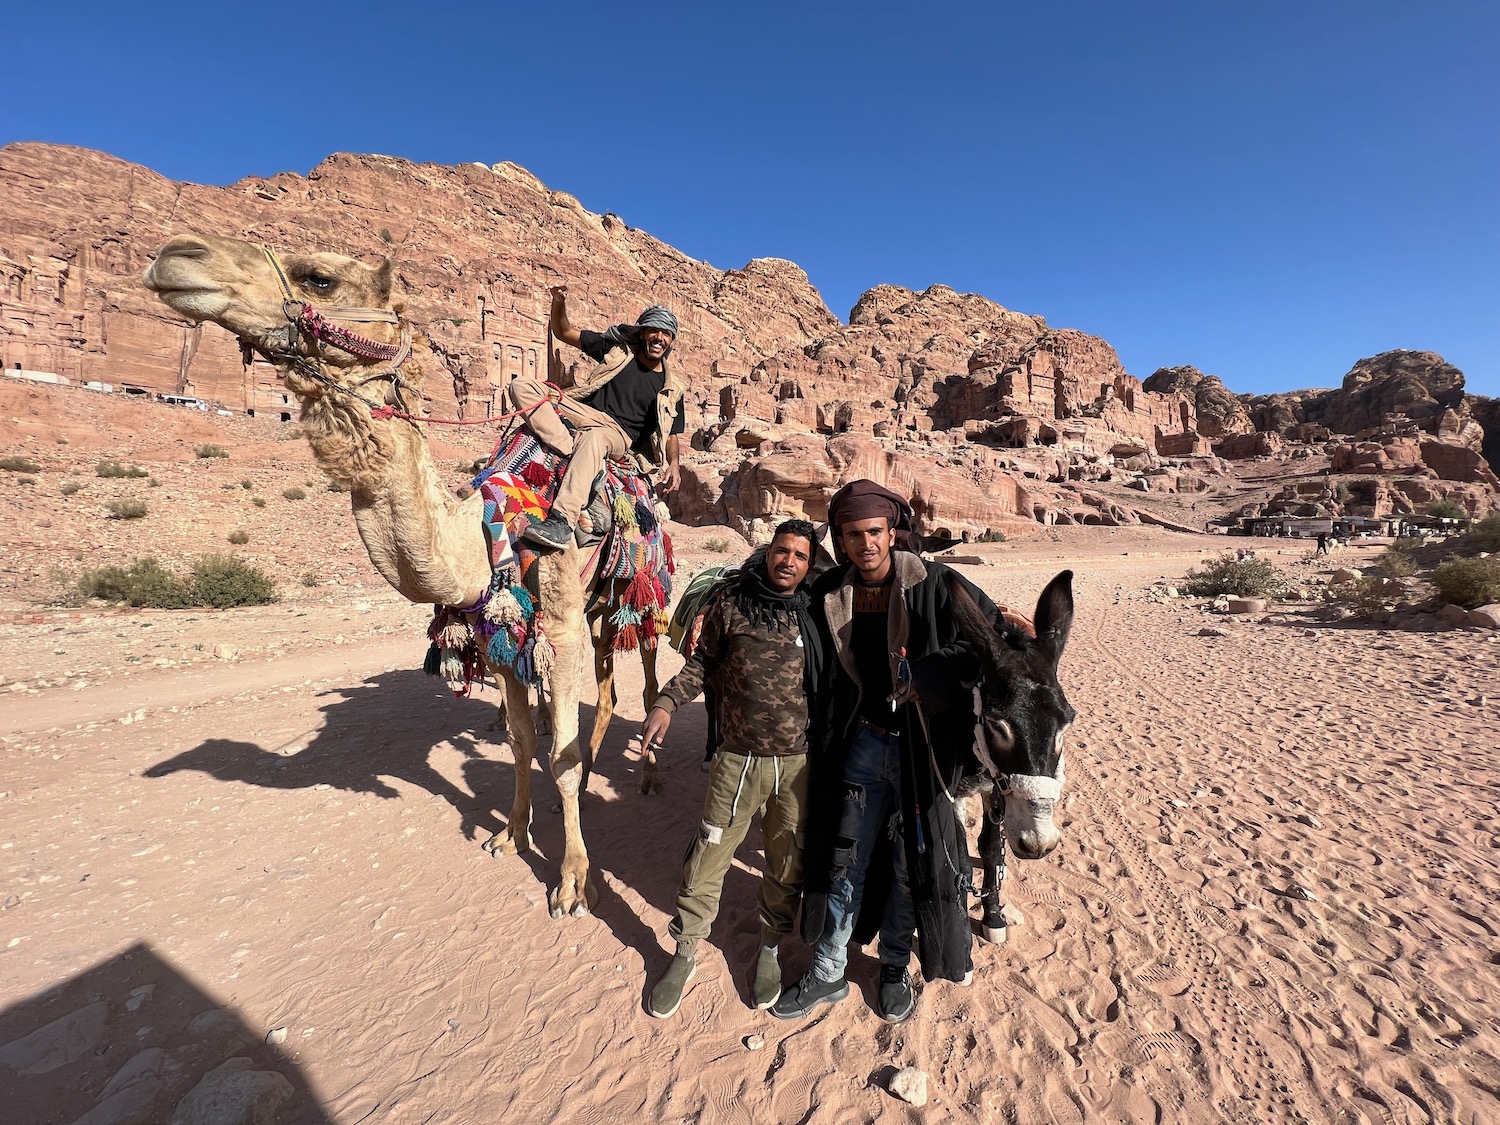 a group of men posing with a camel in the desert